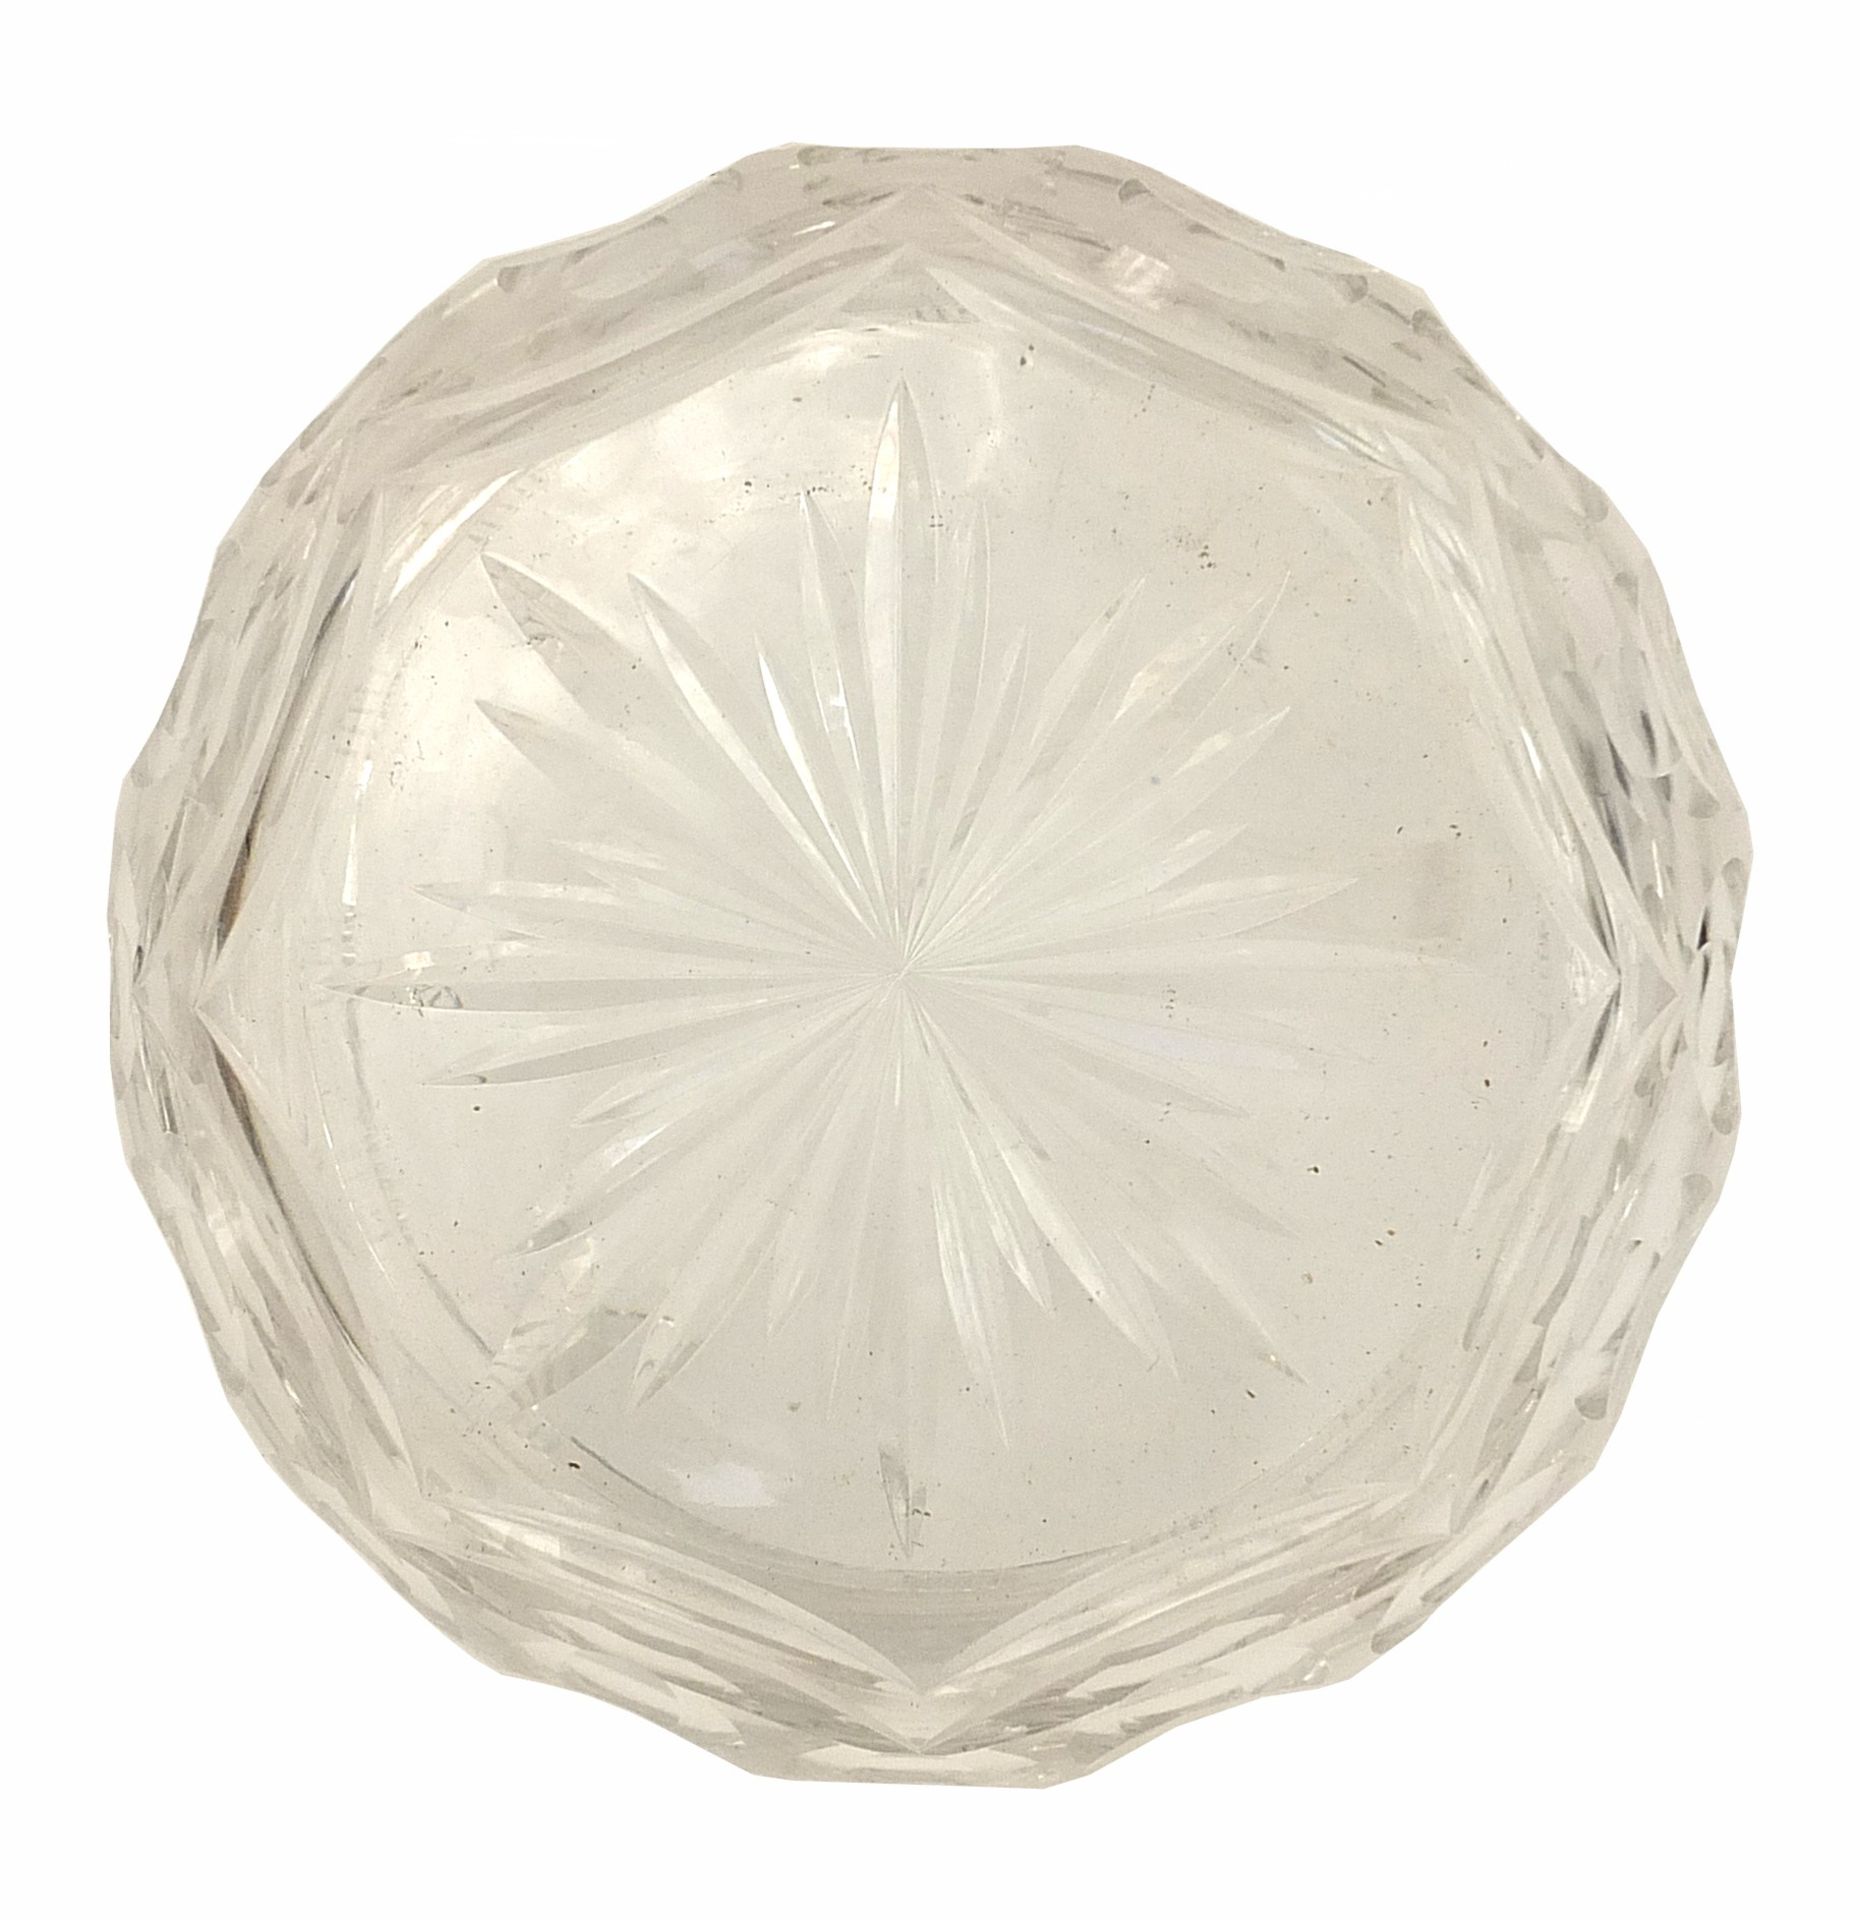 Walsh cut glass fruit bowl with star based decoration and thumbnail sides, 20cm in diameter - Image 3 of 3